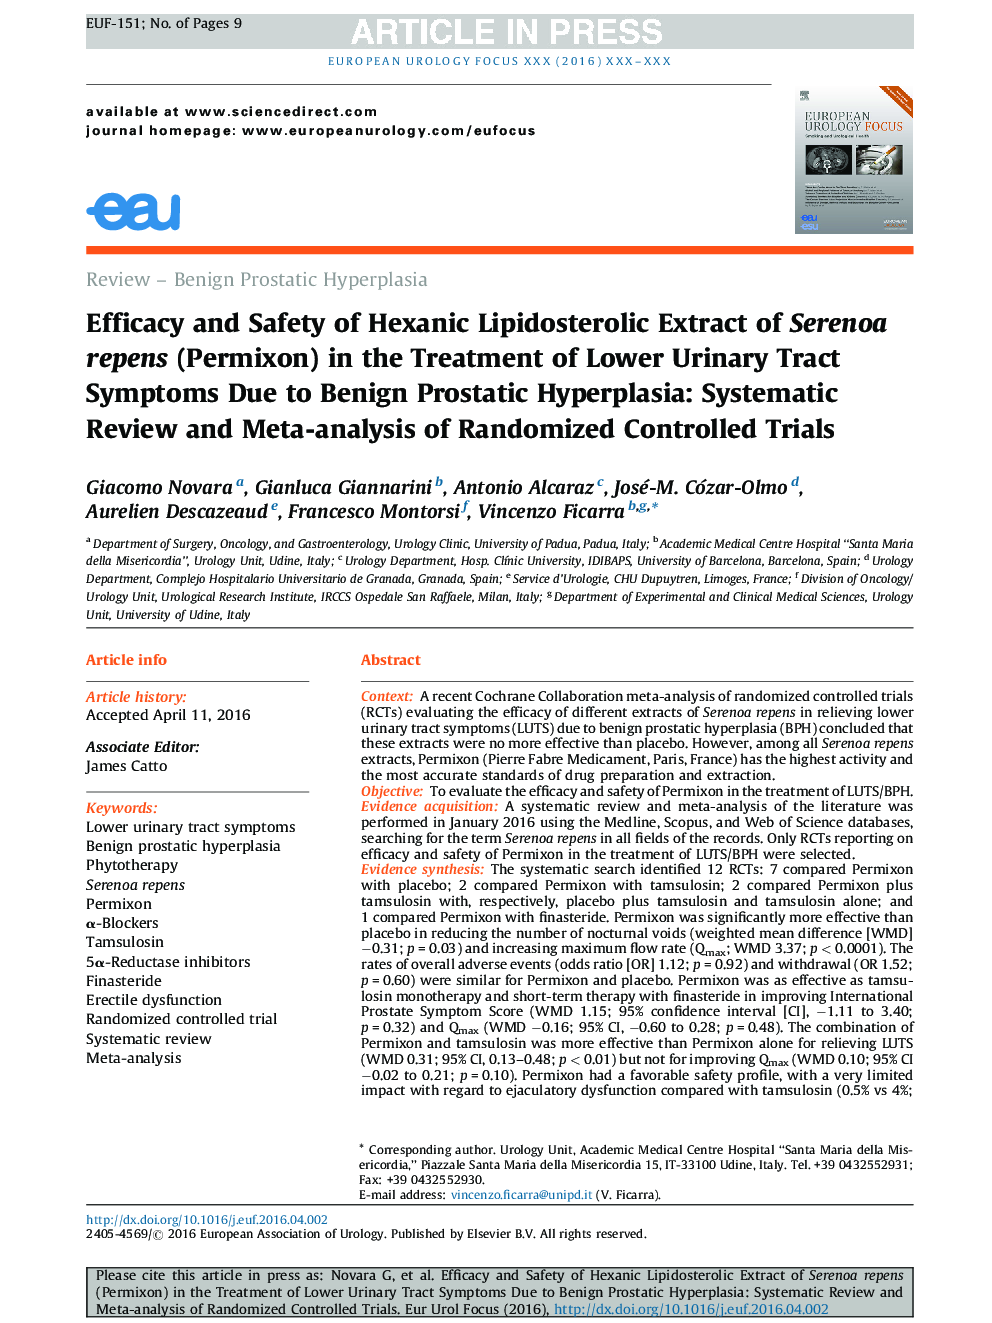 Efficacy and Safety of Hexanic Lipidosterolic Extract of Serenoa repens (Permixon) in the Treatment of Lower Urinary Tract Symptoms Due to Benign Prostatic Hyperplasia: Systematic Review and Meta-analysis of Randomized Controlled Trials